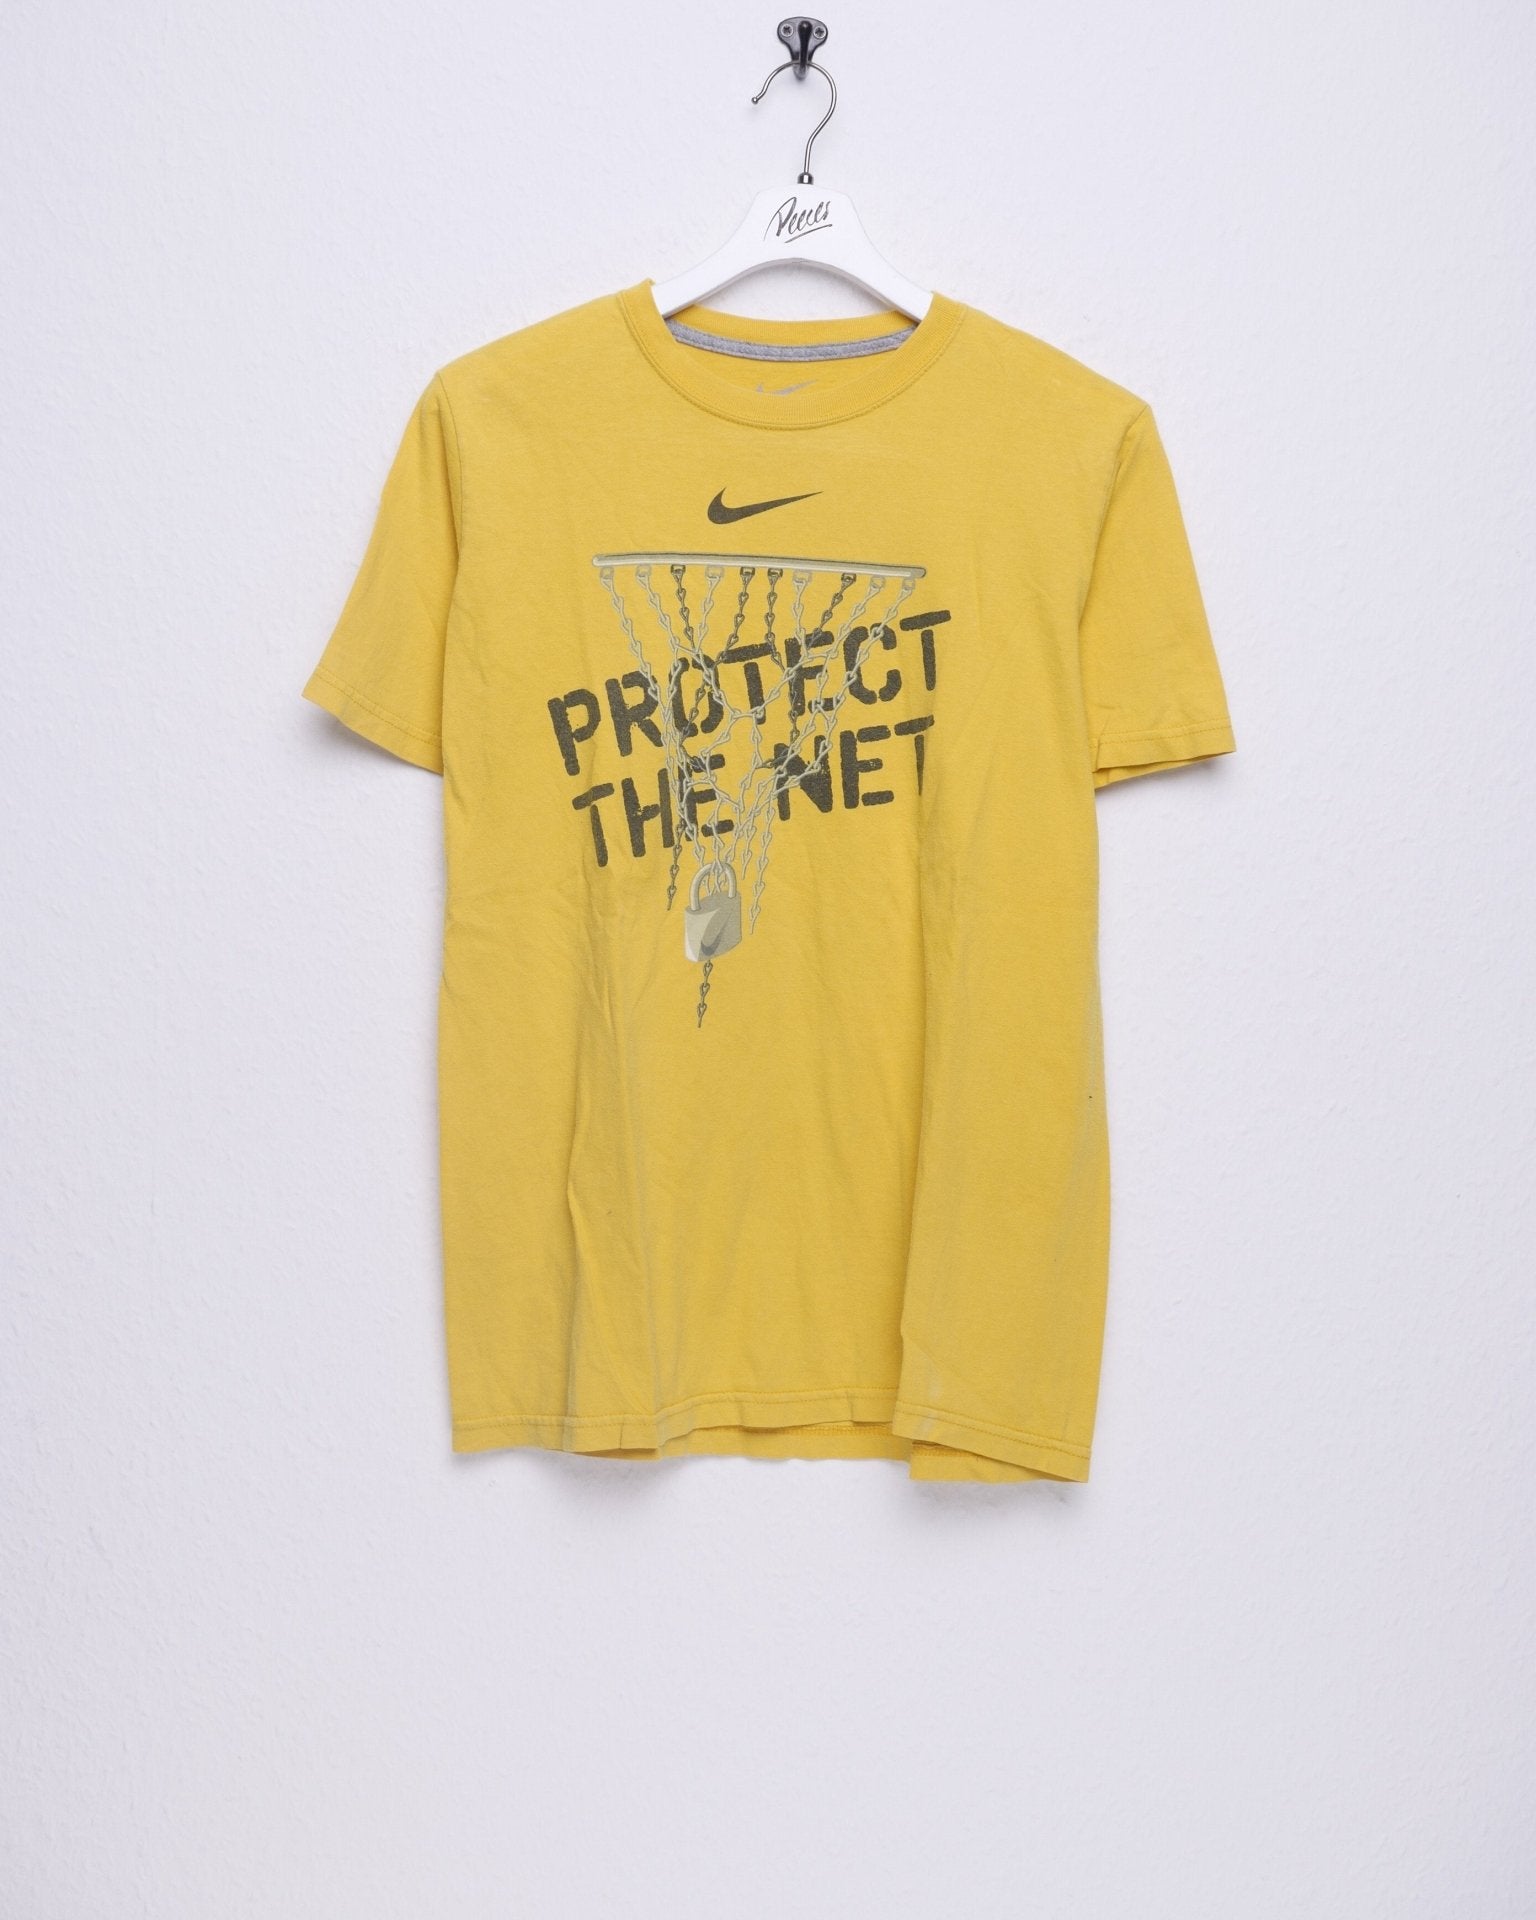 nike Protect the Net printed middle Swoosh Shirt - Peeces